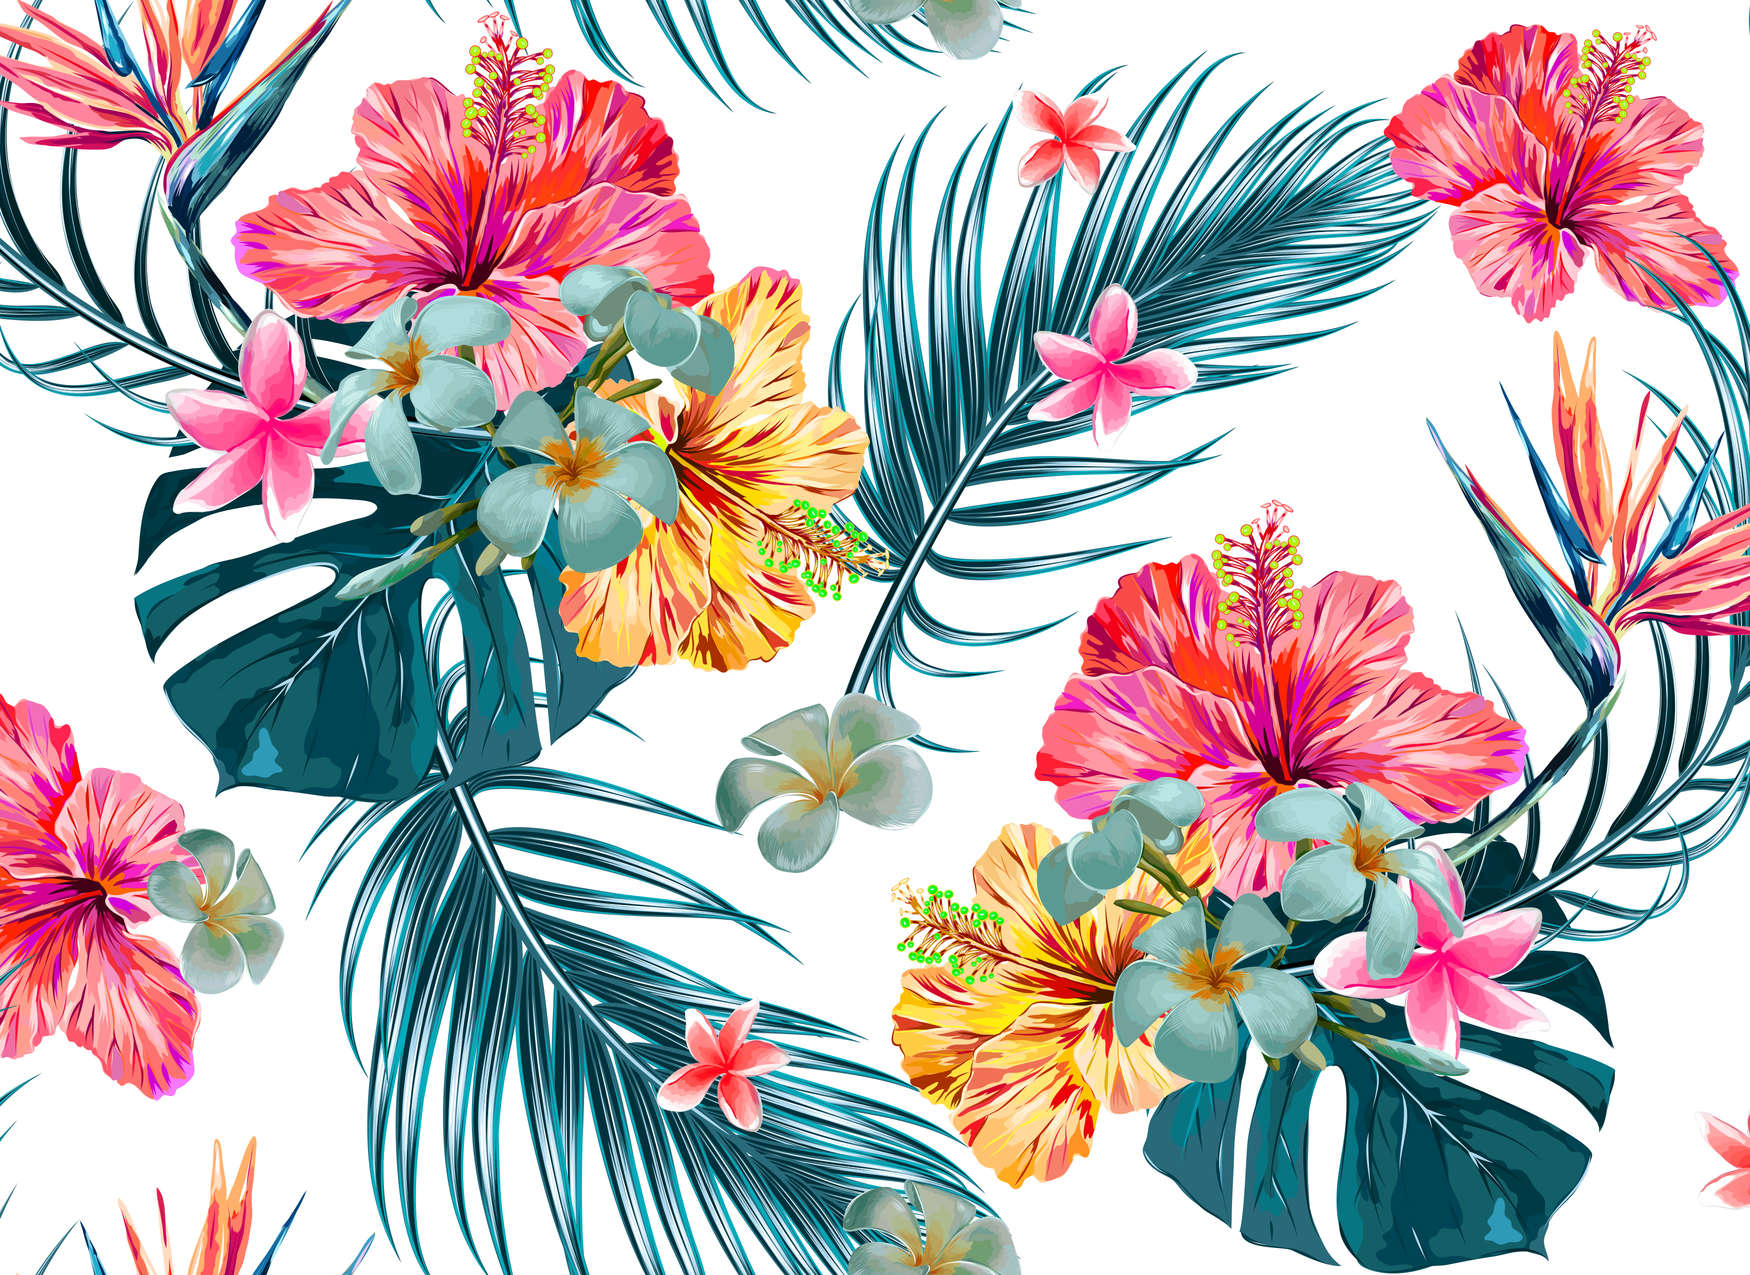             Photo wallpaper with colourful tropical plants - Colorful, Green
        